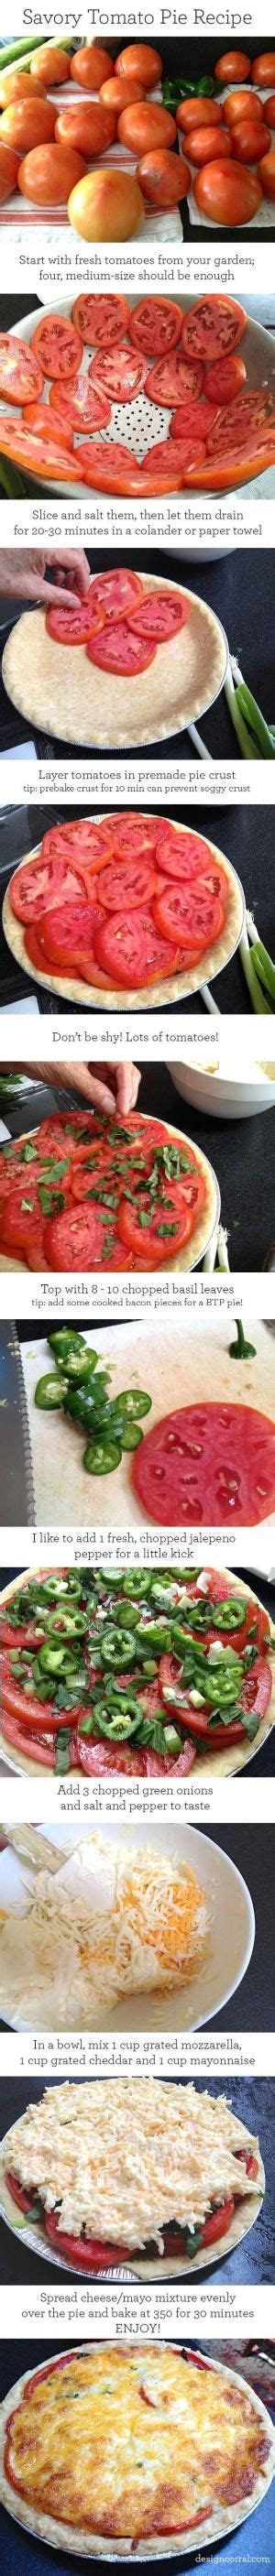 Sprinkle with salt and allow to drain for 10 minutes. Savory Tomato Pie Recipe Little different than Paula Dean ...